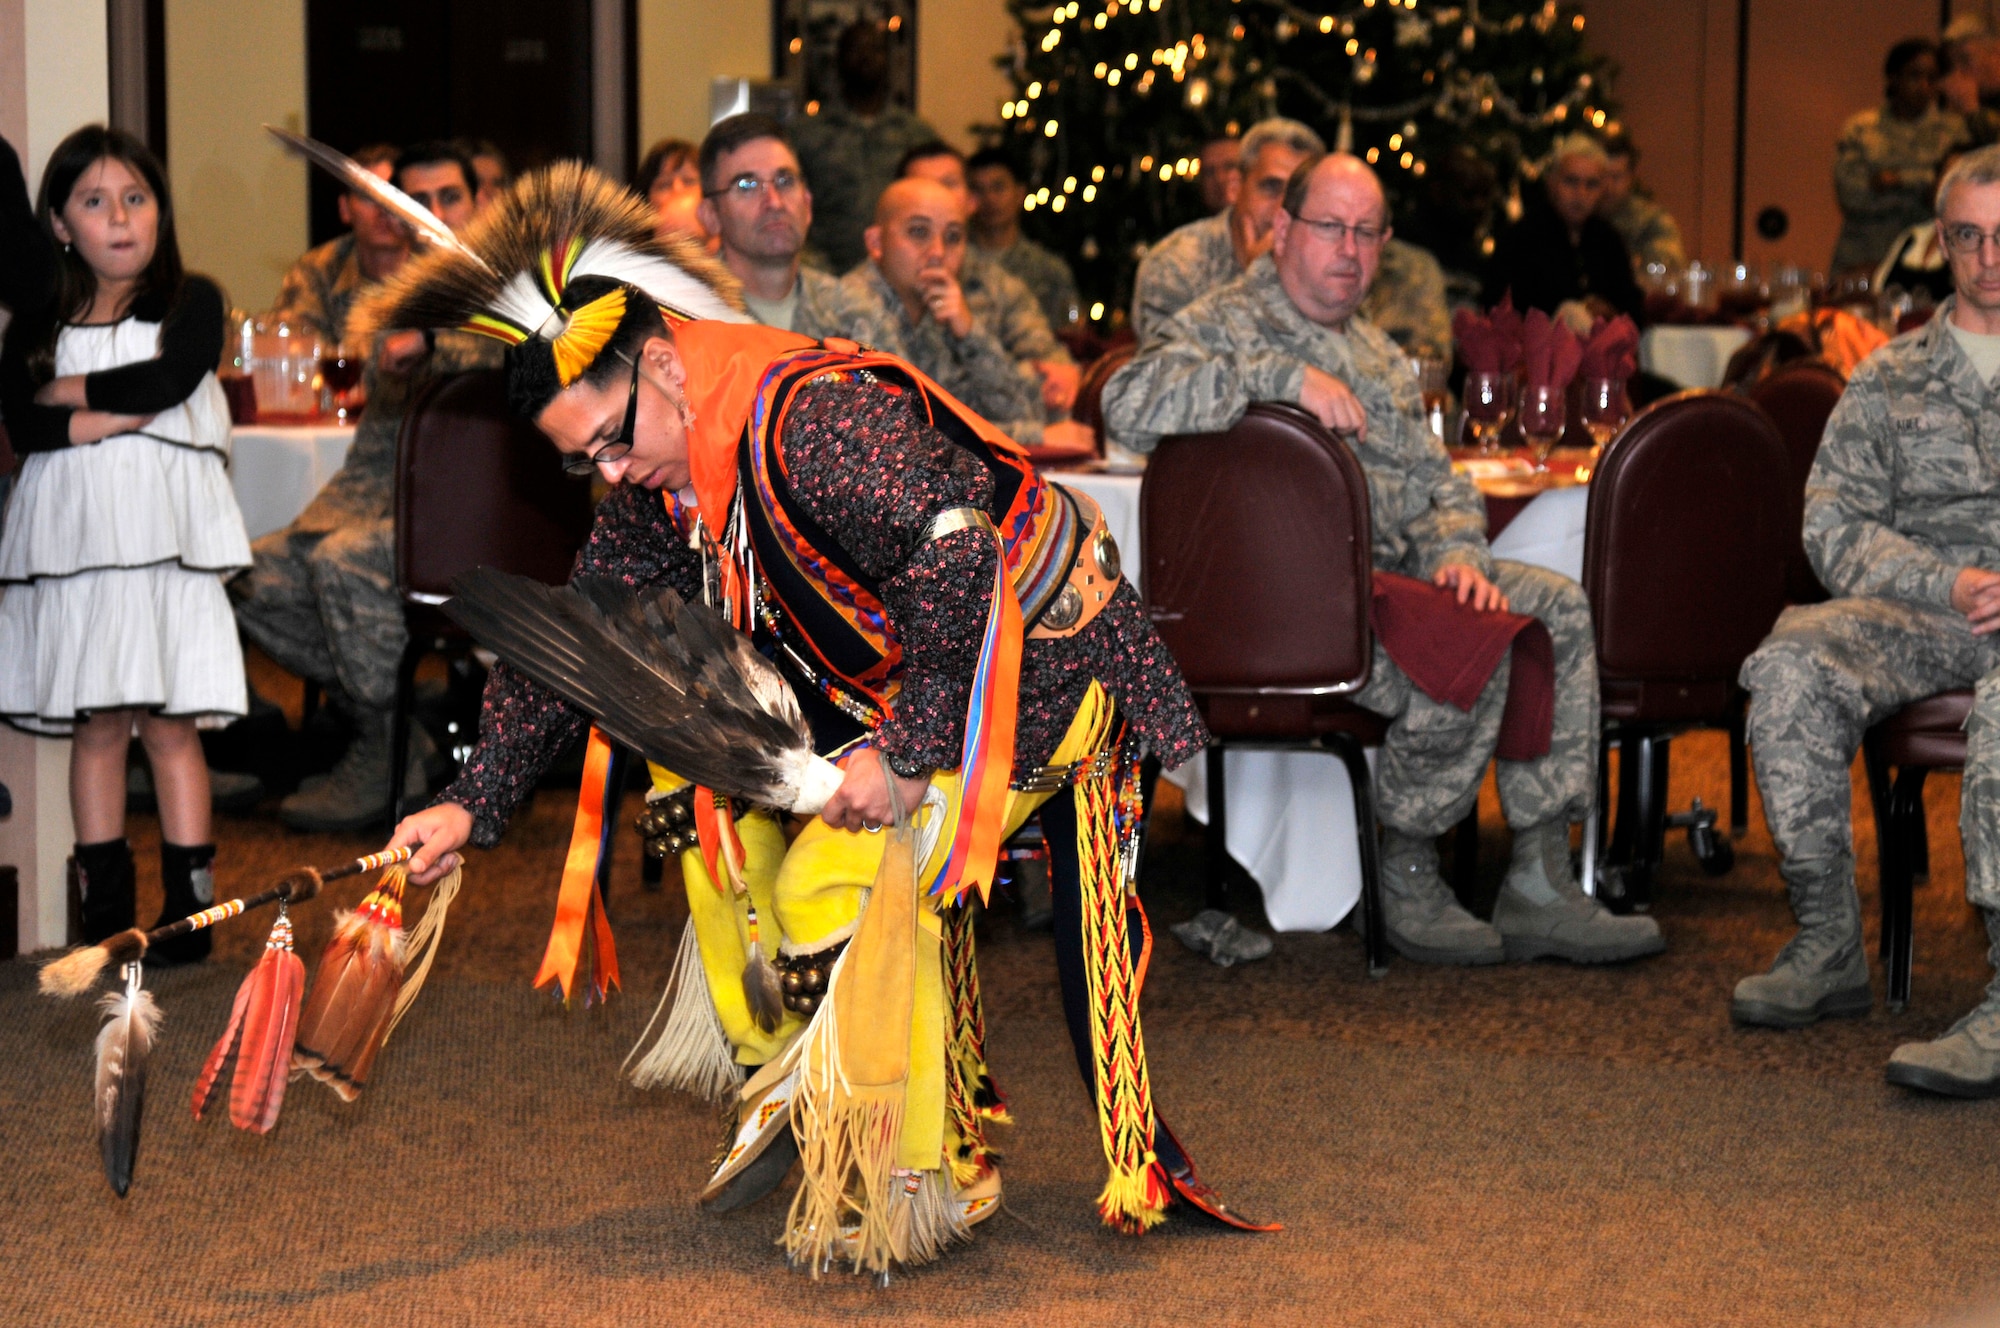 Tech. Sgt. Thundercloud Hirajeta performs a southern plains war dance during the Native American Heritage Month luncheon at the Recce Point Club Beale Air Force Base, Calif. Nov 29, 2011  Hirajeta is representing the Comanche people. (U.S. Air Force photo by Staff Sgt. Jeremy McGuffin/Released)